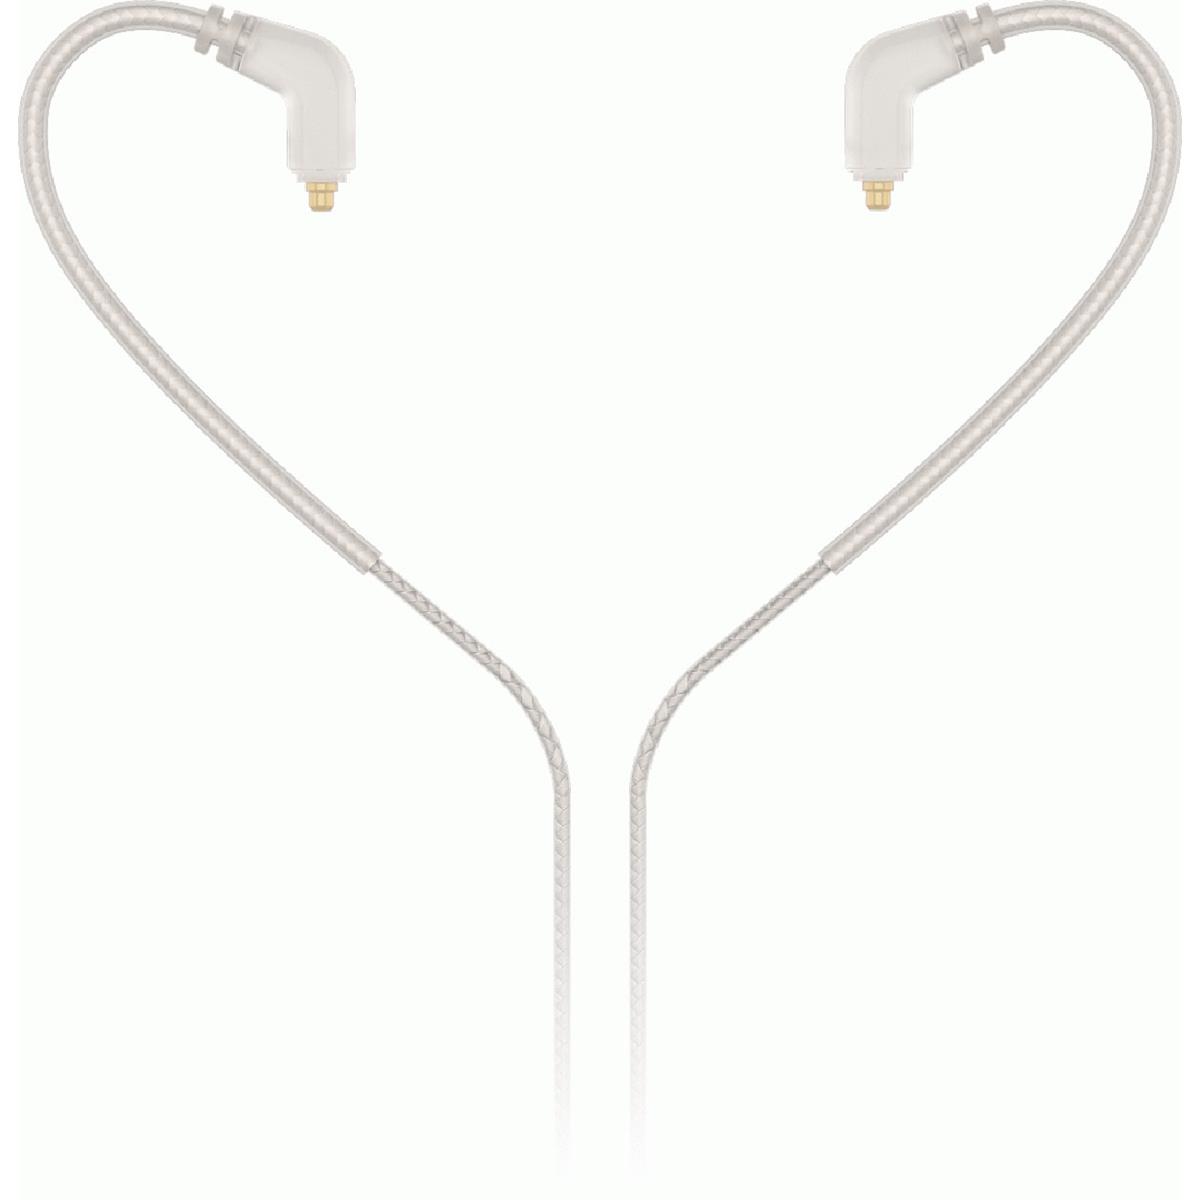 Image of Behringer IMC251-CL 63&quot; Premium Shielded Cable for In-Ear Monitors with MMCX